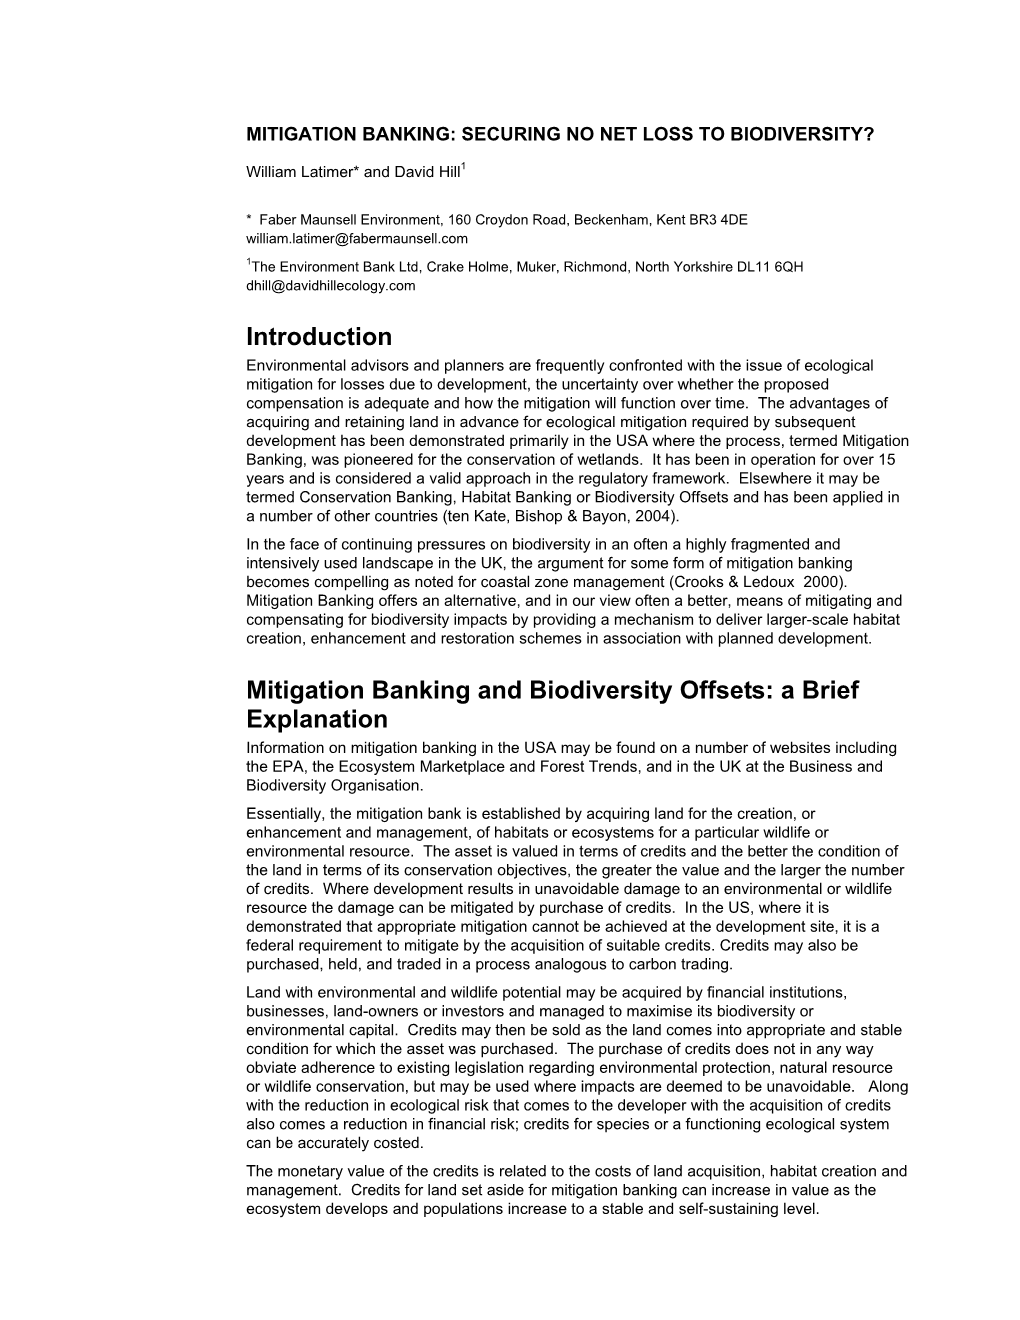 Introduction Mitigation Banking and Biodiversity Offsets